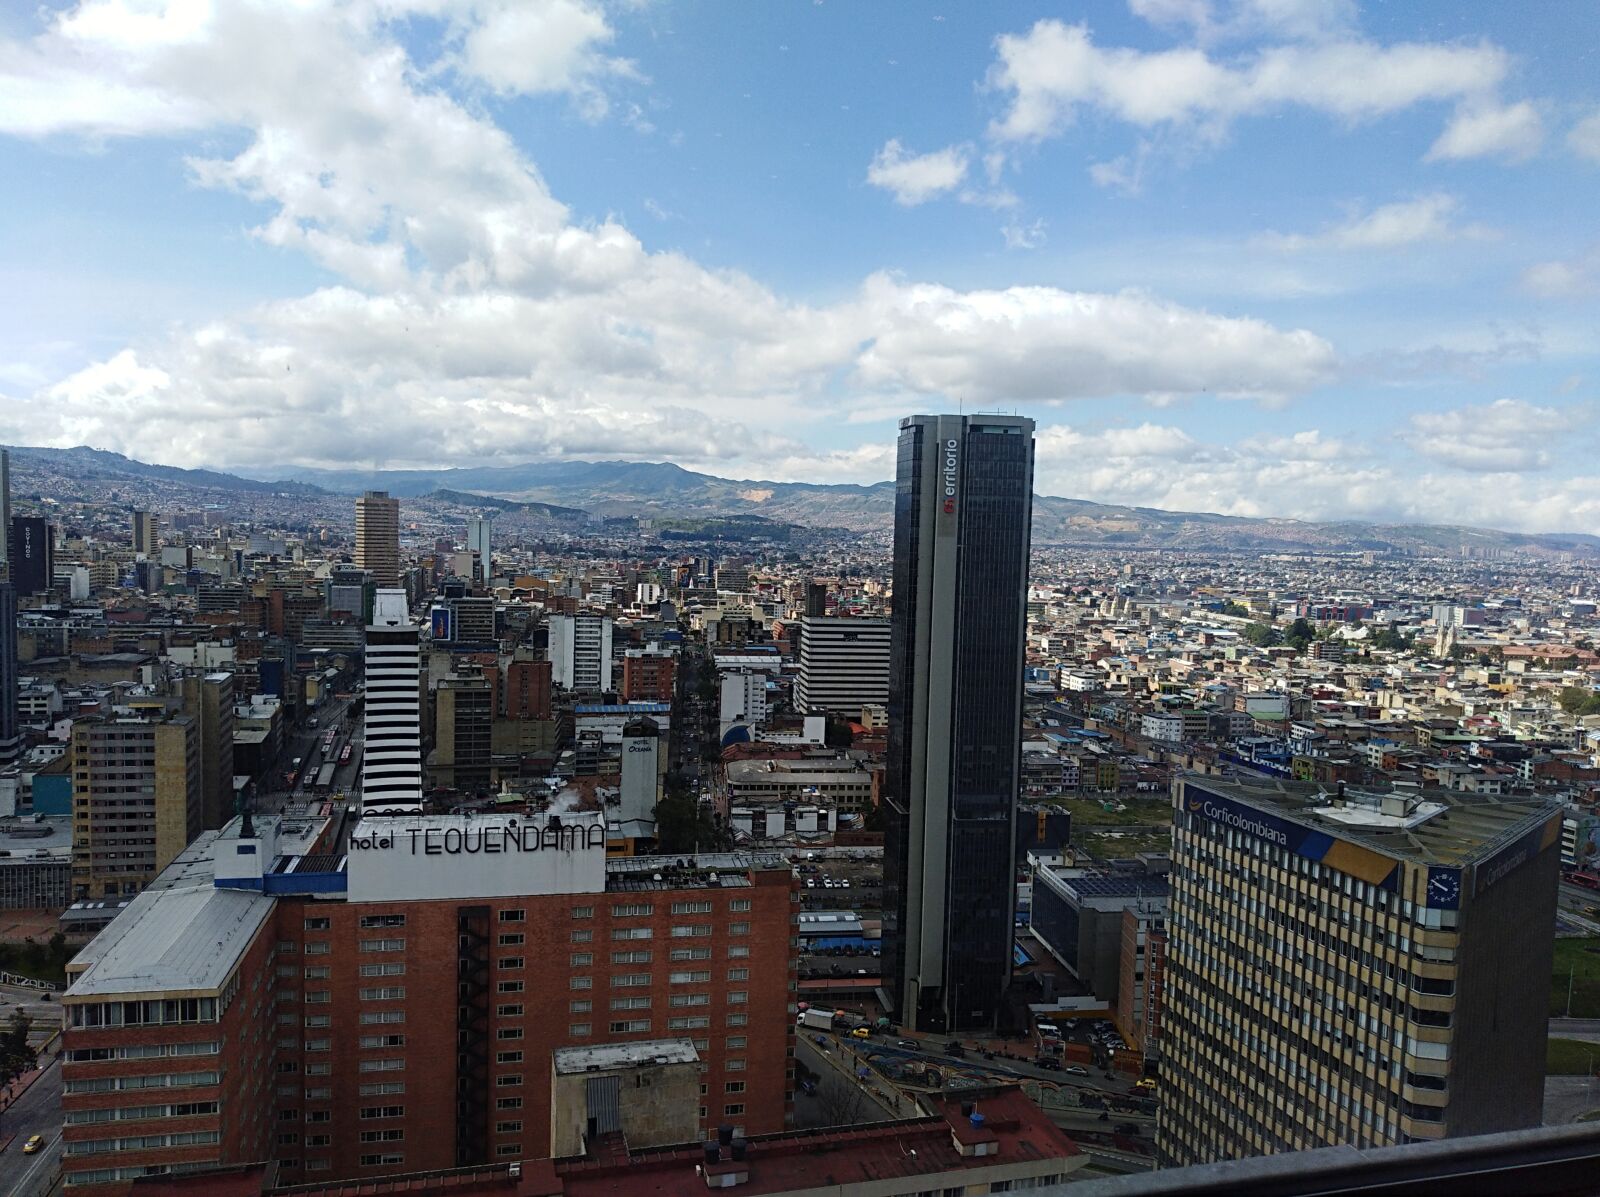 HUAWEI Y7 sample photo. City, tequendama, building photography